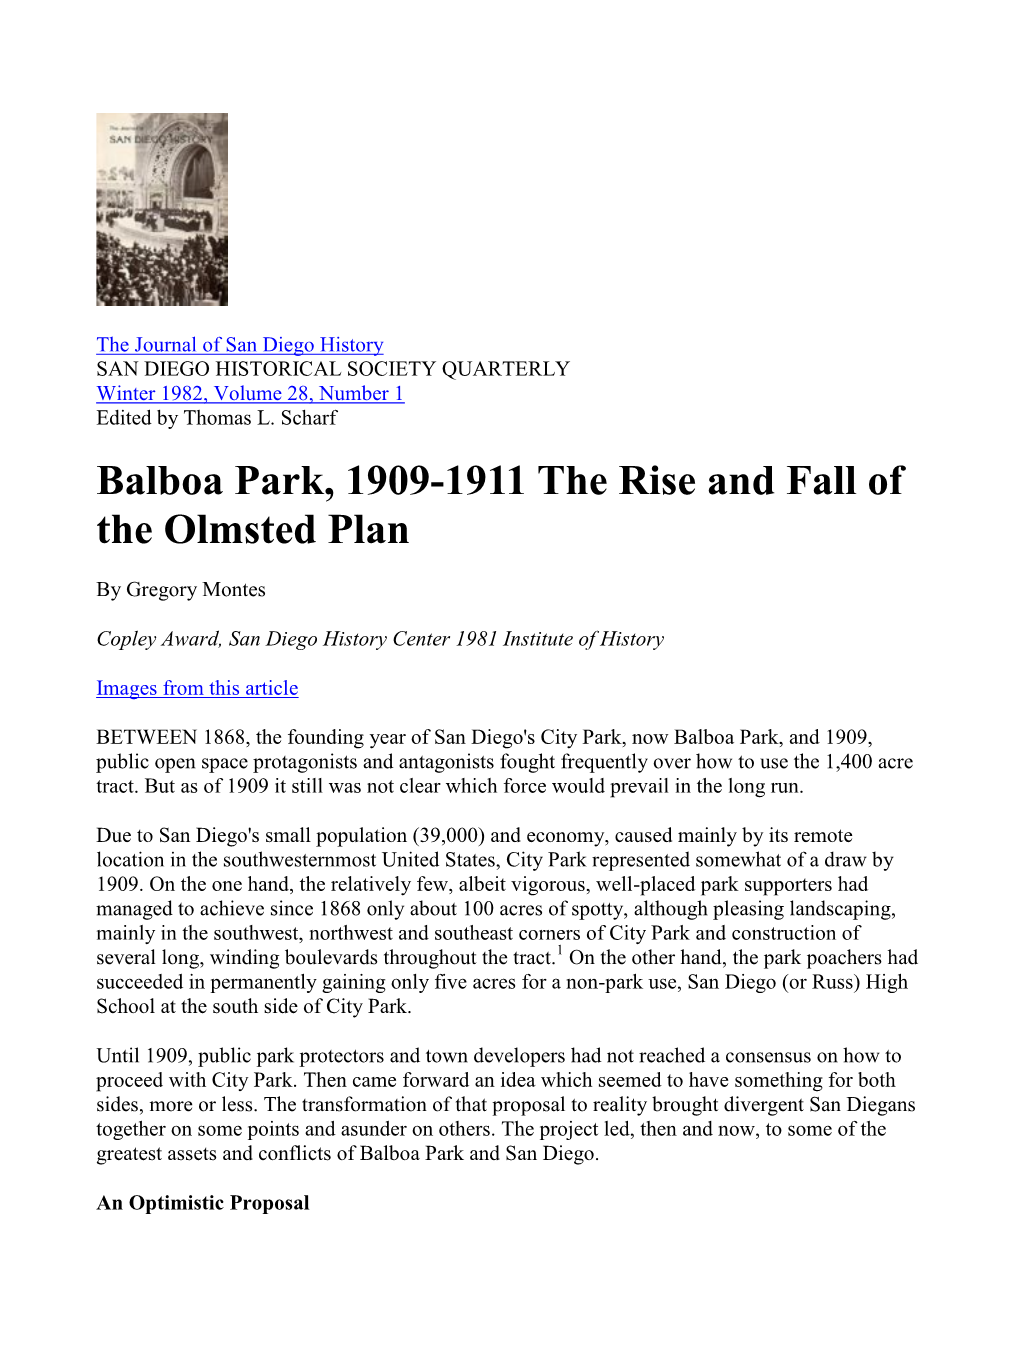 Balboa Park, 1909-1911 the Rise and Fall of the Olmsted Plan